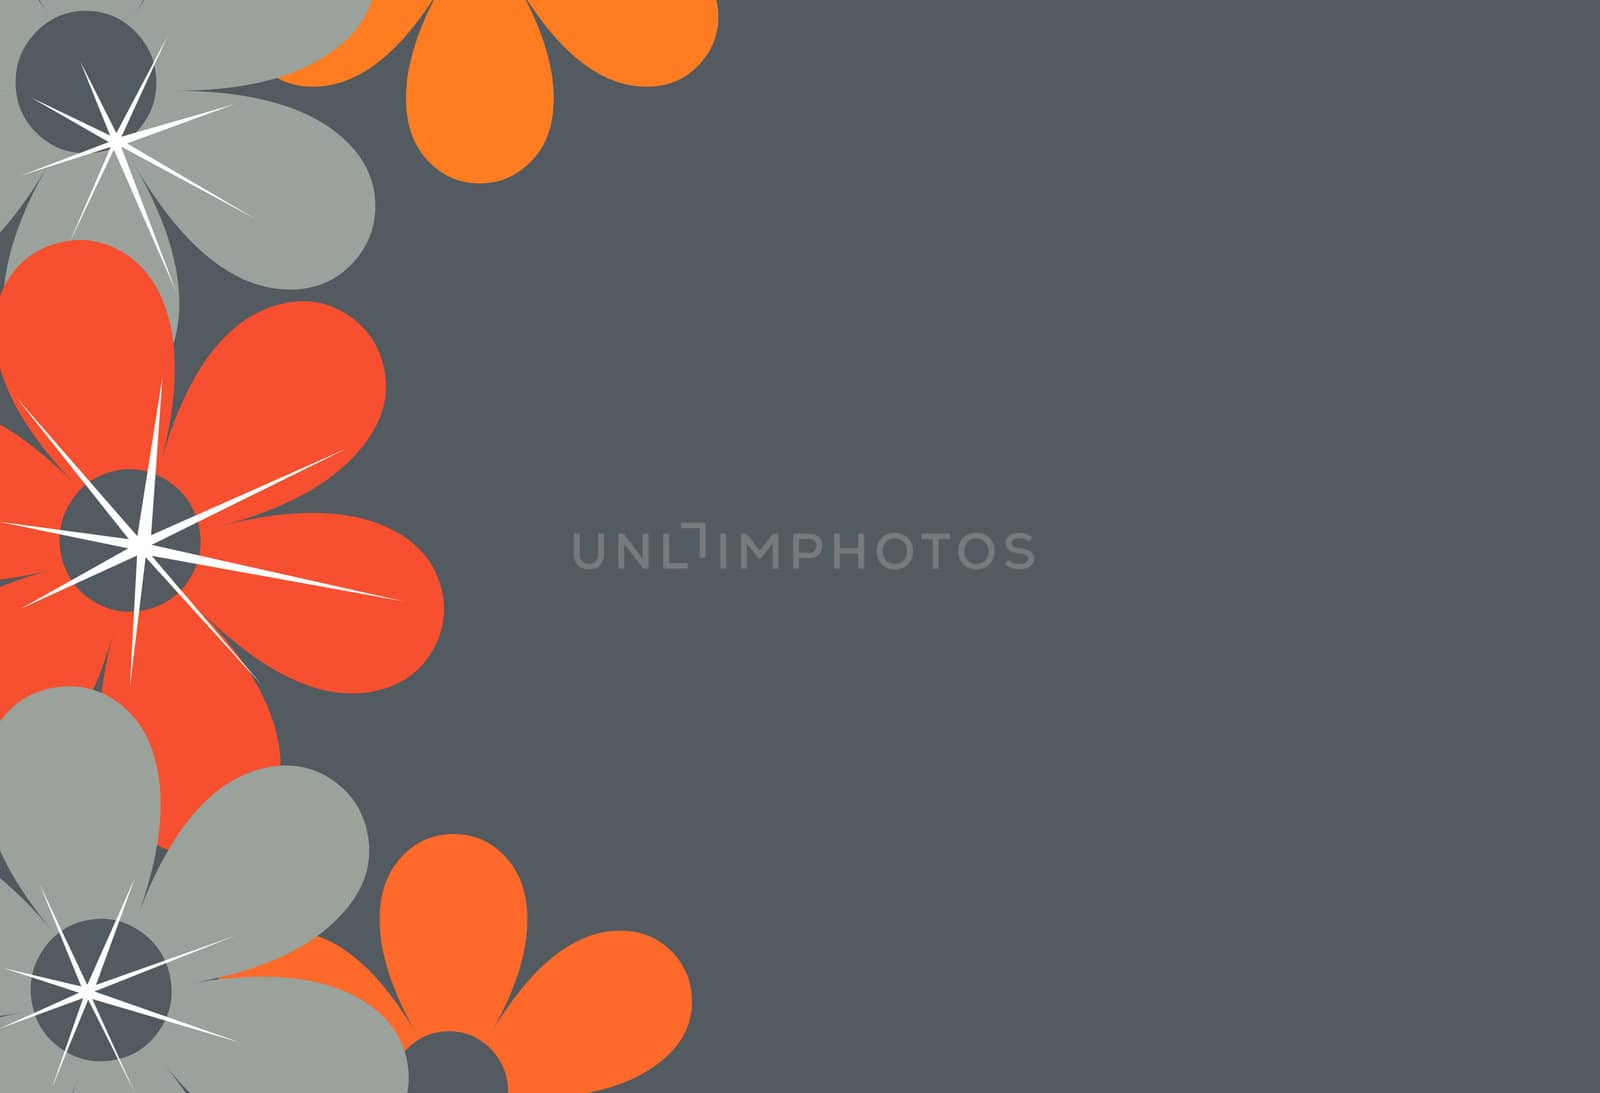 A background illustration featuring a border in gray and orange.